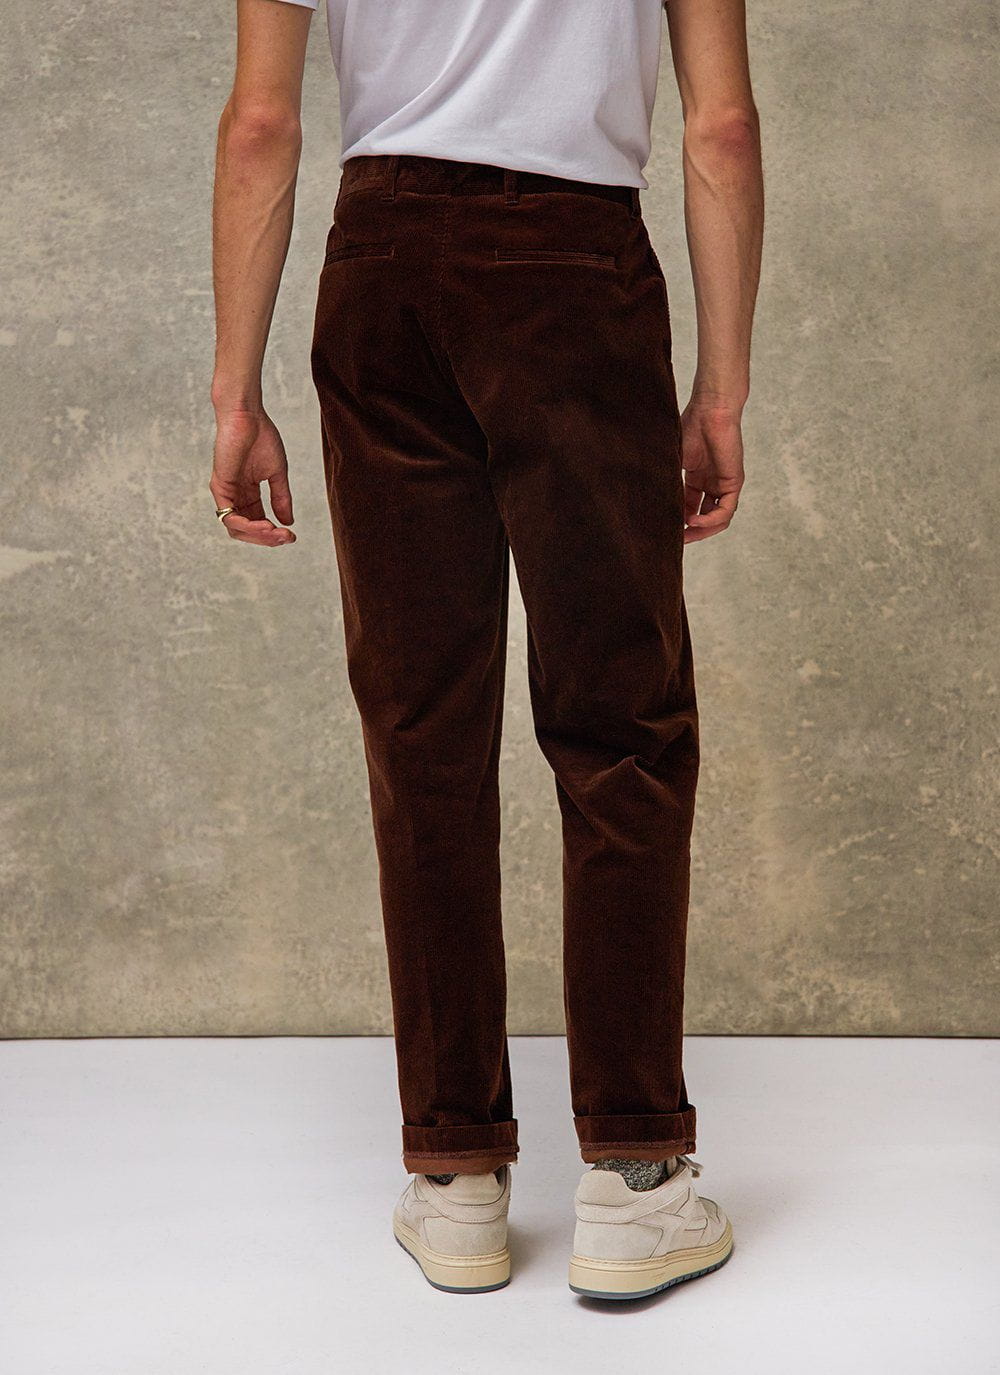 Autumn/Winter Corduroy Straight Slim Stretch Classic Mens Corduroy Trousers  For Men Business Casual Wear In Brown, Khaki, Black, And Blue From  Tonethiny, $22.3 | DHgate.Com